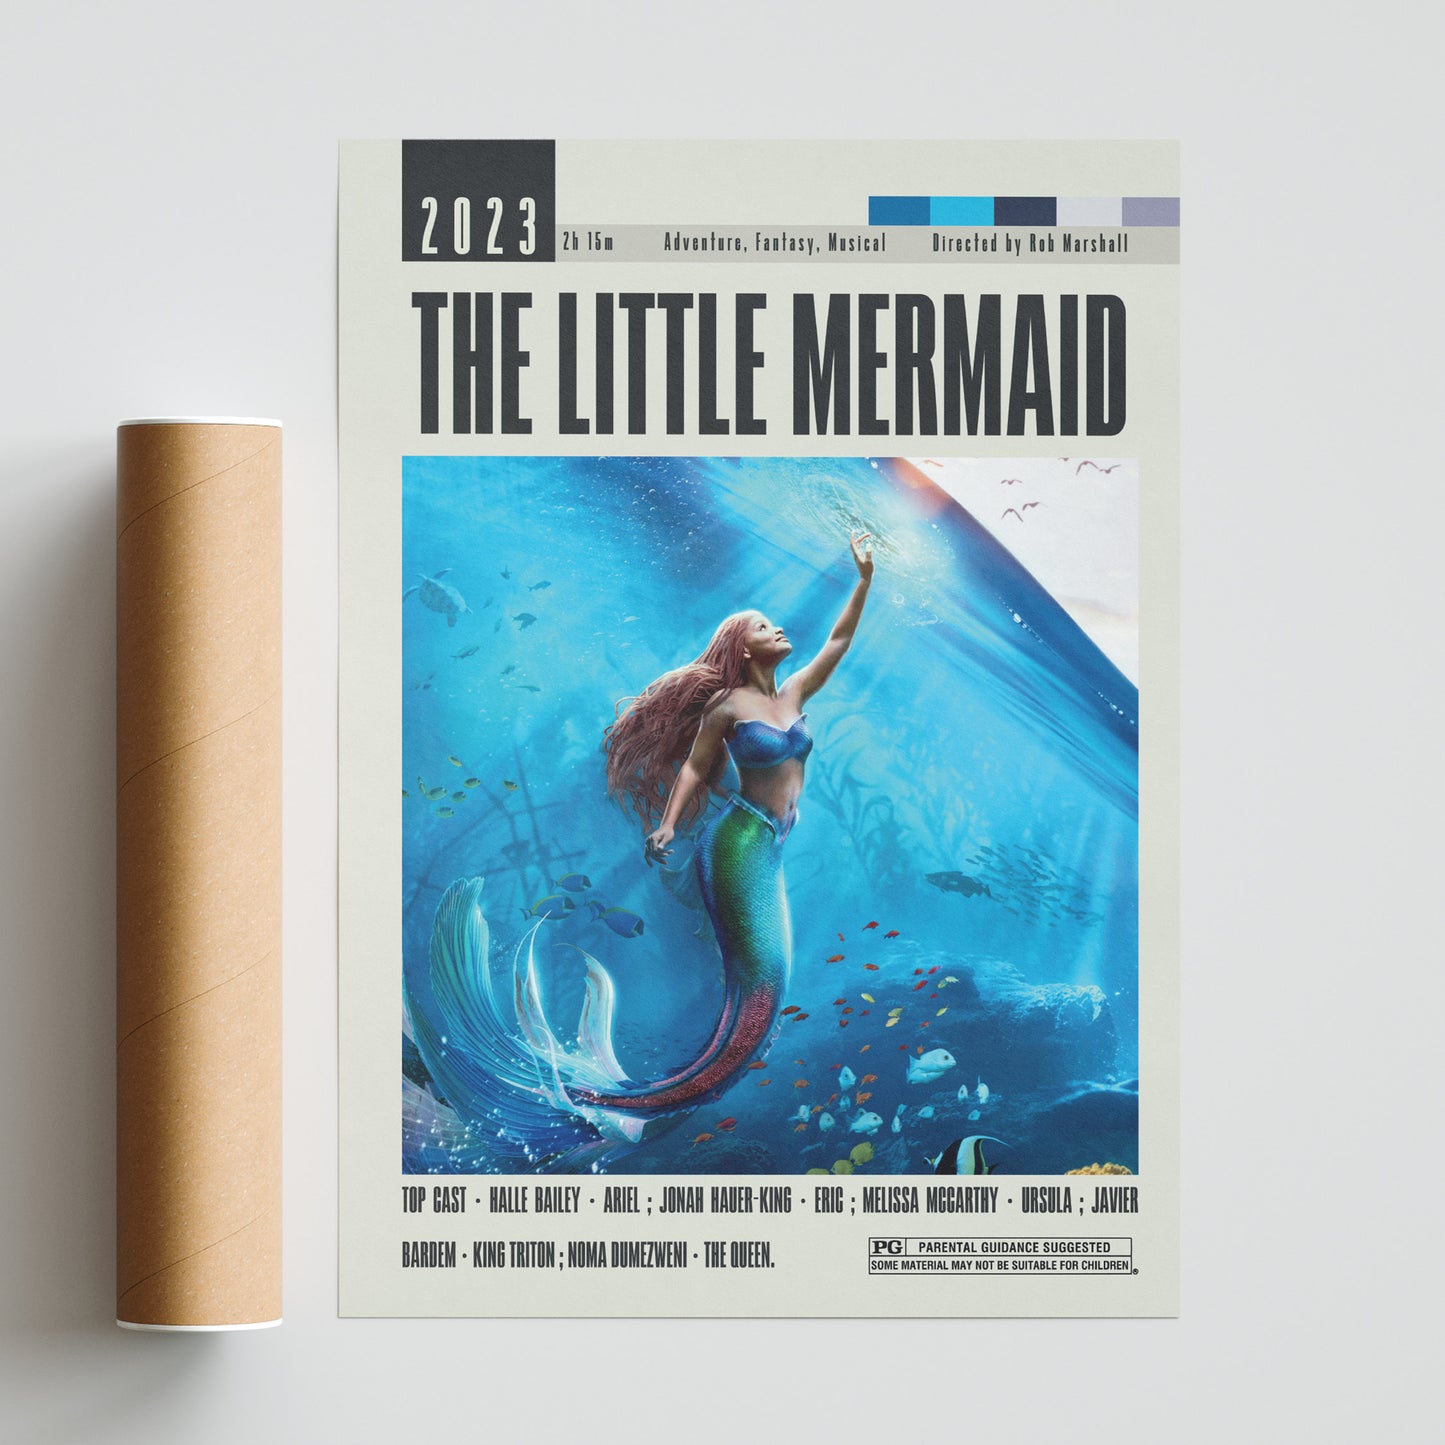 Discover the beauty of the sea with "The Little Mermaid" poster from Rob Marshall Movies. This original movie poster is available in the UK for a cheap price, featuring stunning vintage movie art. Unframed and ready to hang, it's the perfect addition to any movie lover's collection.